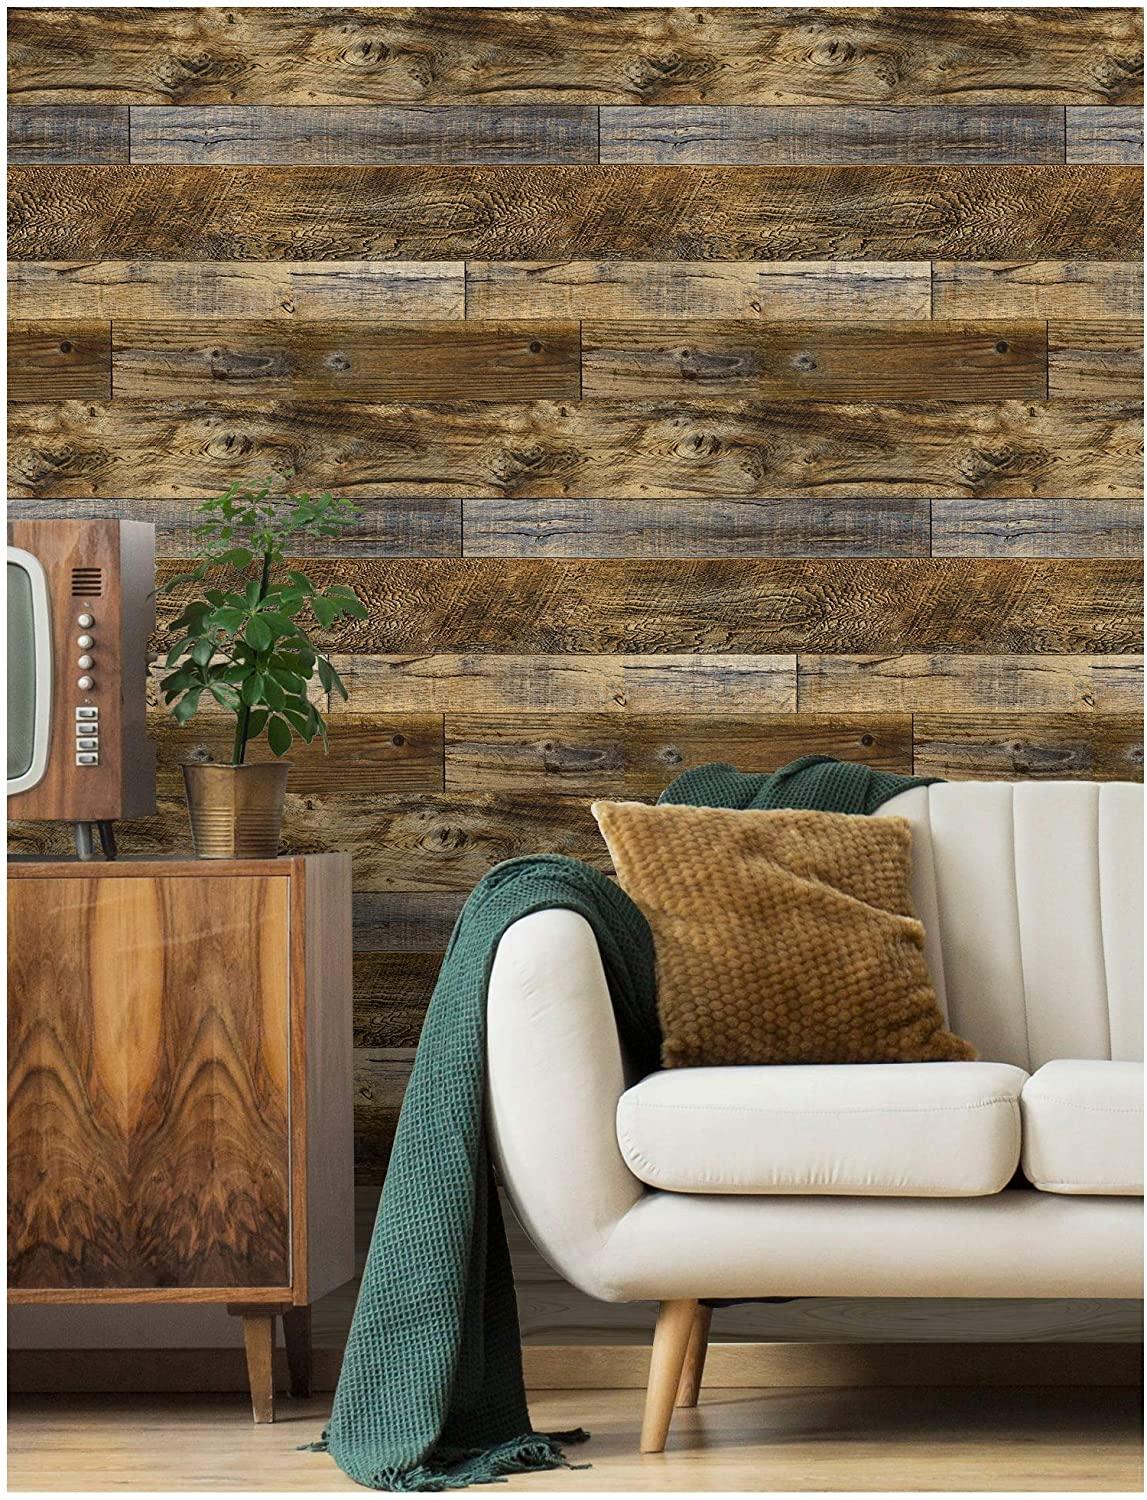 LUCKYYJ Peel and Stick Wood Plank Wallpaper Self-Adhesive 3d Wall Stickers Living Room Bedroom Walls Home Decoration Wallpapers